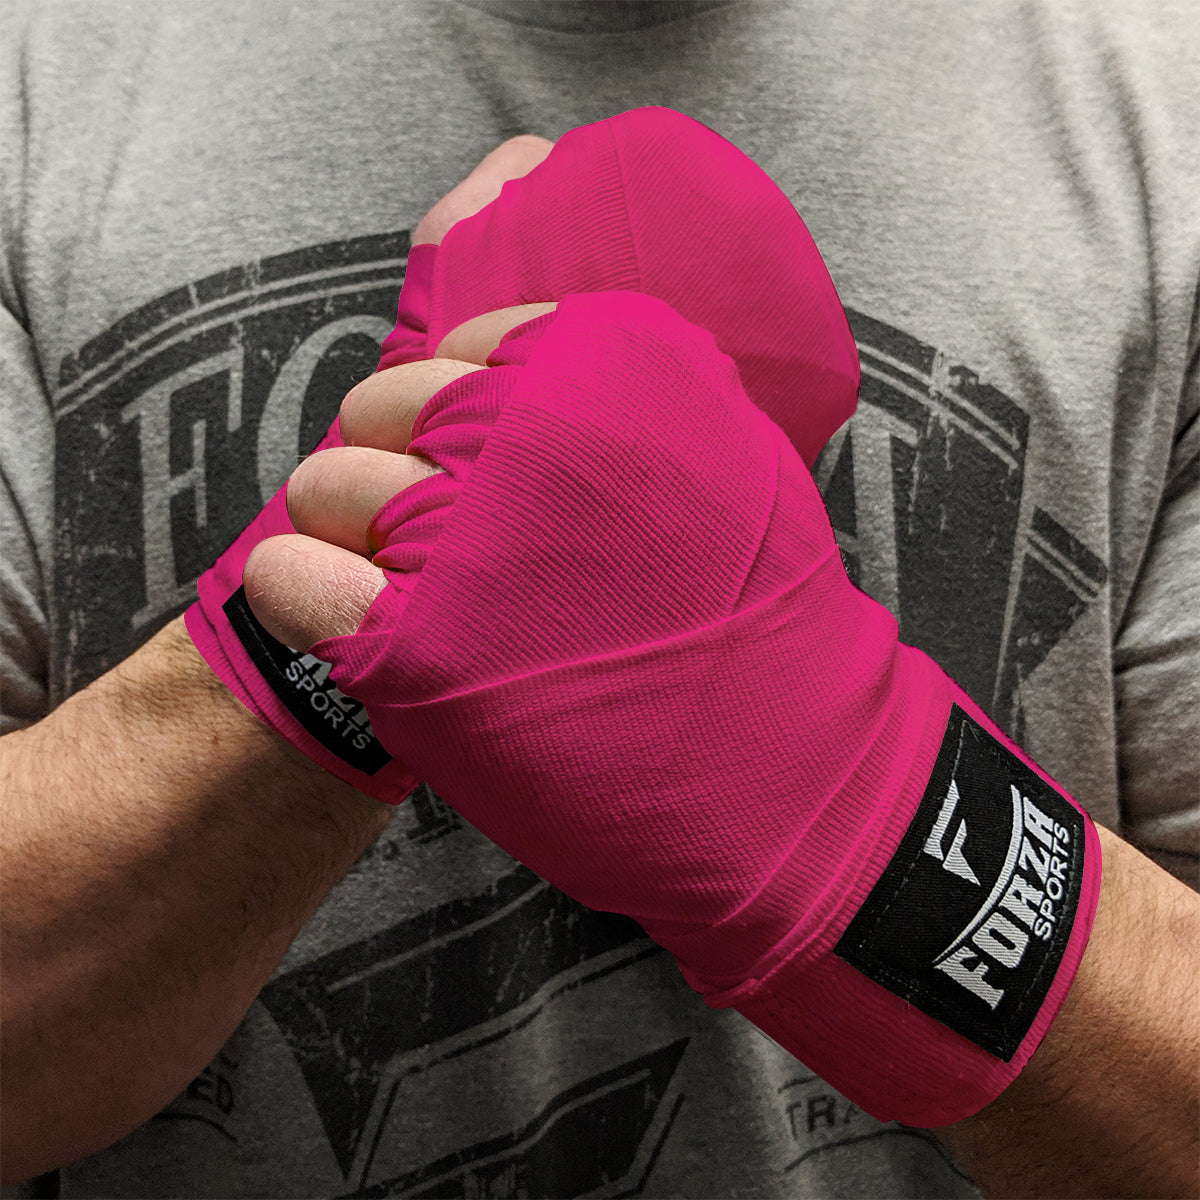 Forza Sports 120" Mexican Style Boxing and MMA Handwraps Forza Sports